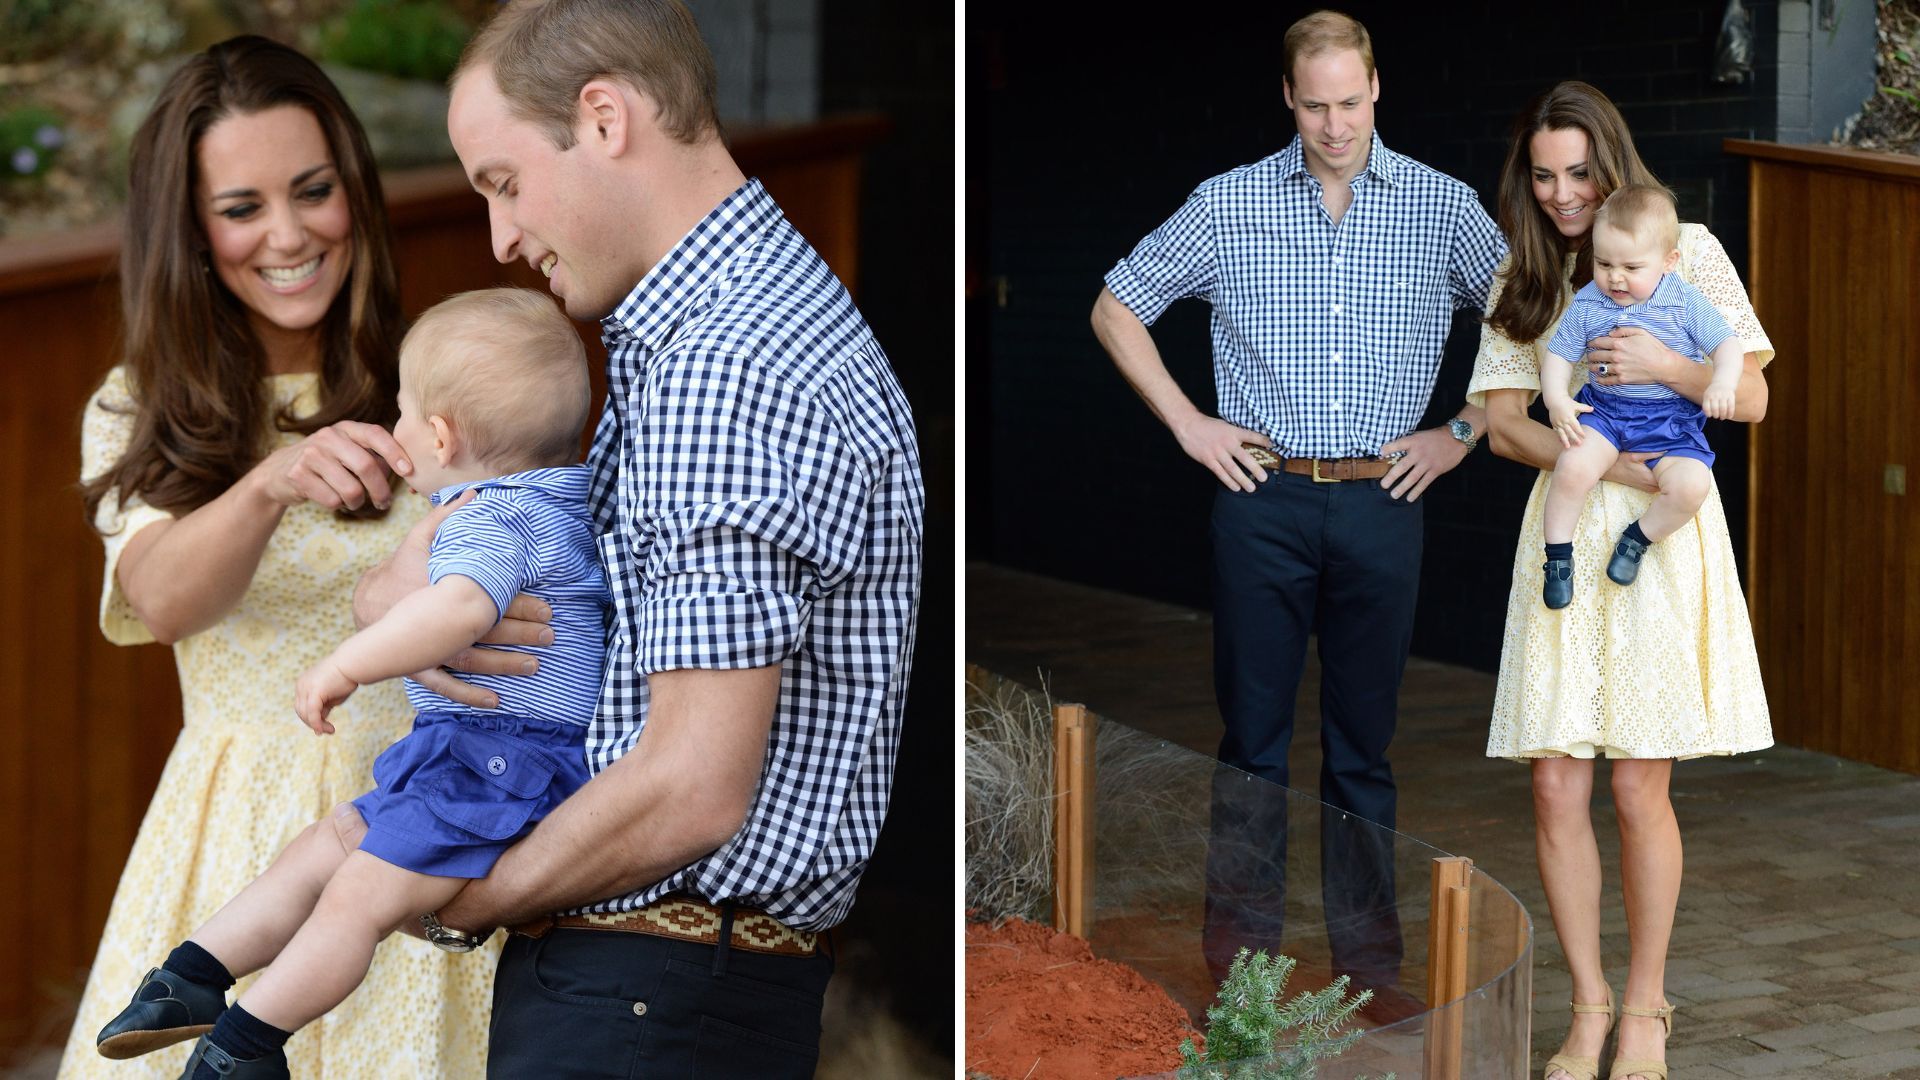 <p>                     William and Kate's 2014 tour to Australia and New Zealand was always going to be iconic, as they took their son, Prince George, on his first overseas family outing.                   </p>                                      <p>                     While travelling the world with a young baby might sound like torture for some, it was obvious that having Prince George with them meant everything to the first-time parents.                   </p>                                      <p>                     In standout photos from their trip, the family of three visited Taronga Zoo in Sydney. They all looked equally as excited to see the various animals, and Kate couldn't resist a pinch of her son's chubby cheeks.                   </p>